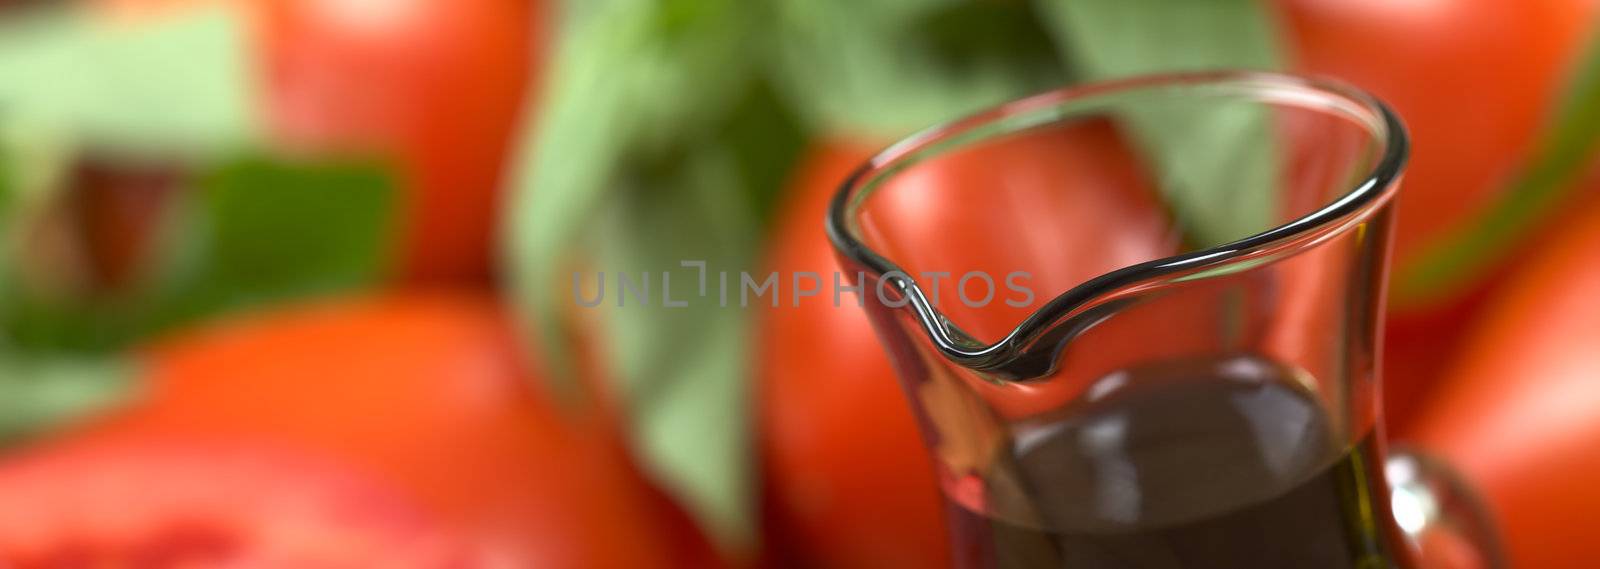 Balsamic vinegar with tomato and basil in the back (Very Shallow Depth of Field, Focus on the front of the bottle rim)